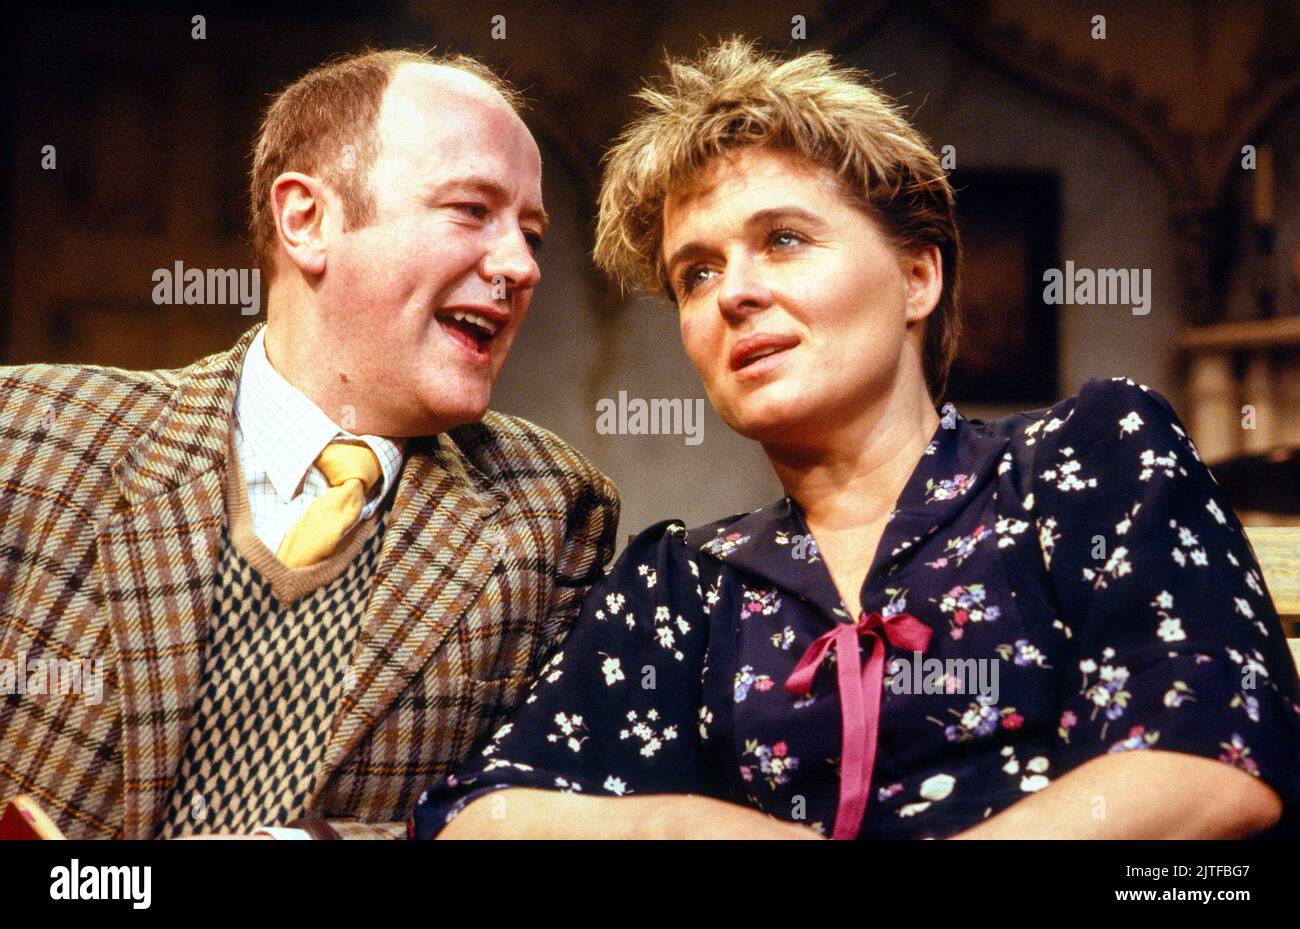 Niall Buggy (Casimir), Sinead Cusack (Alice) in ARISTOCRATS by Brian Friel at the Hampstead Theatre, London NW3  02/06/1988  set design: Gordon Stewart & Andrew Wood  costumes: Sheelagh Killeen  lighting: Paul Denby  director: Robin Lefevre Stock Photo